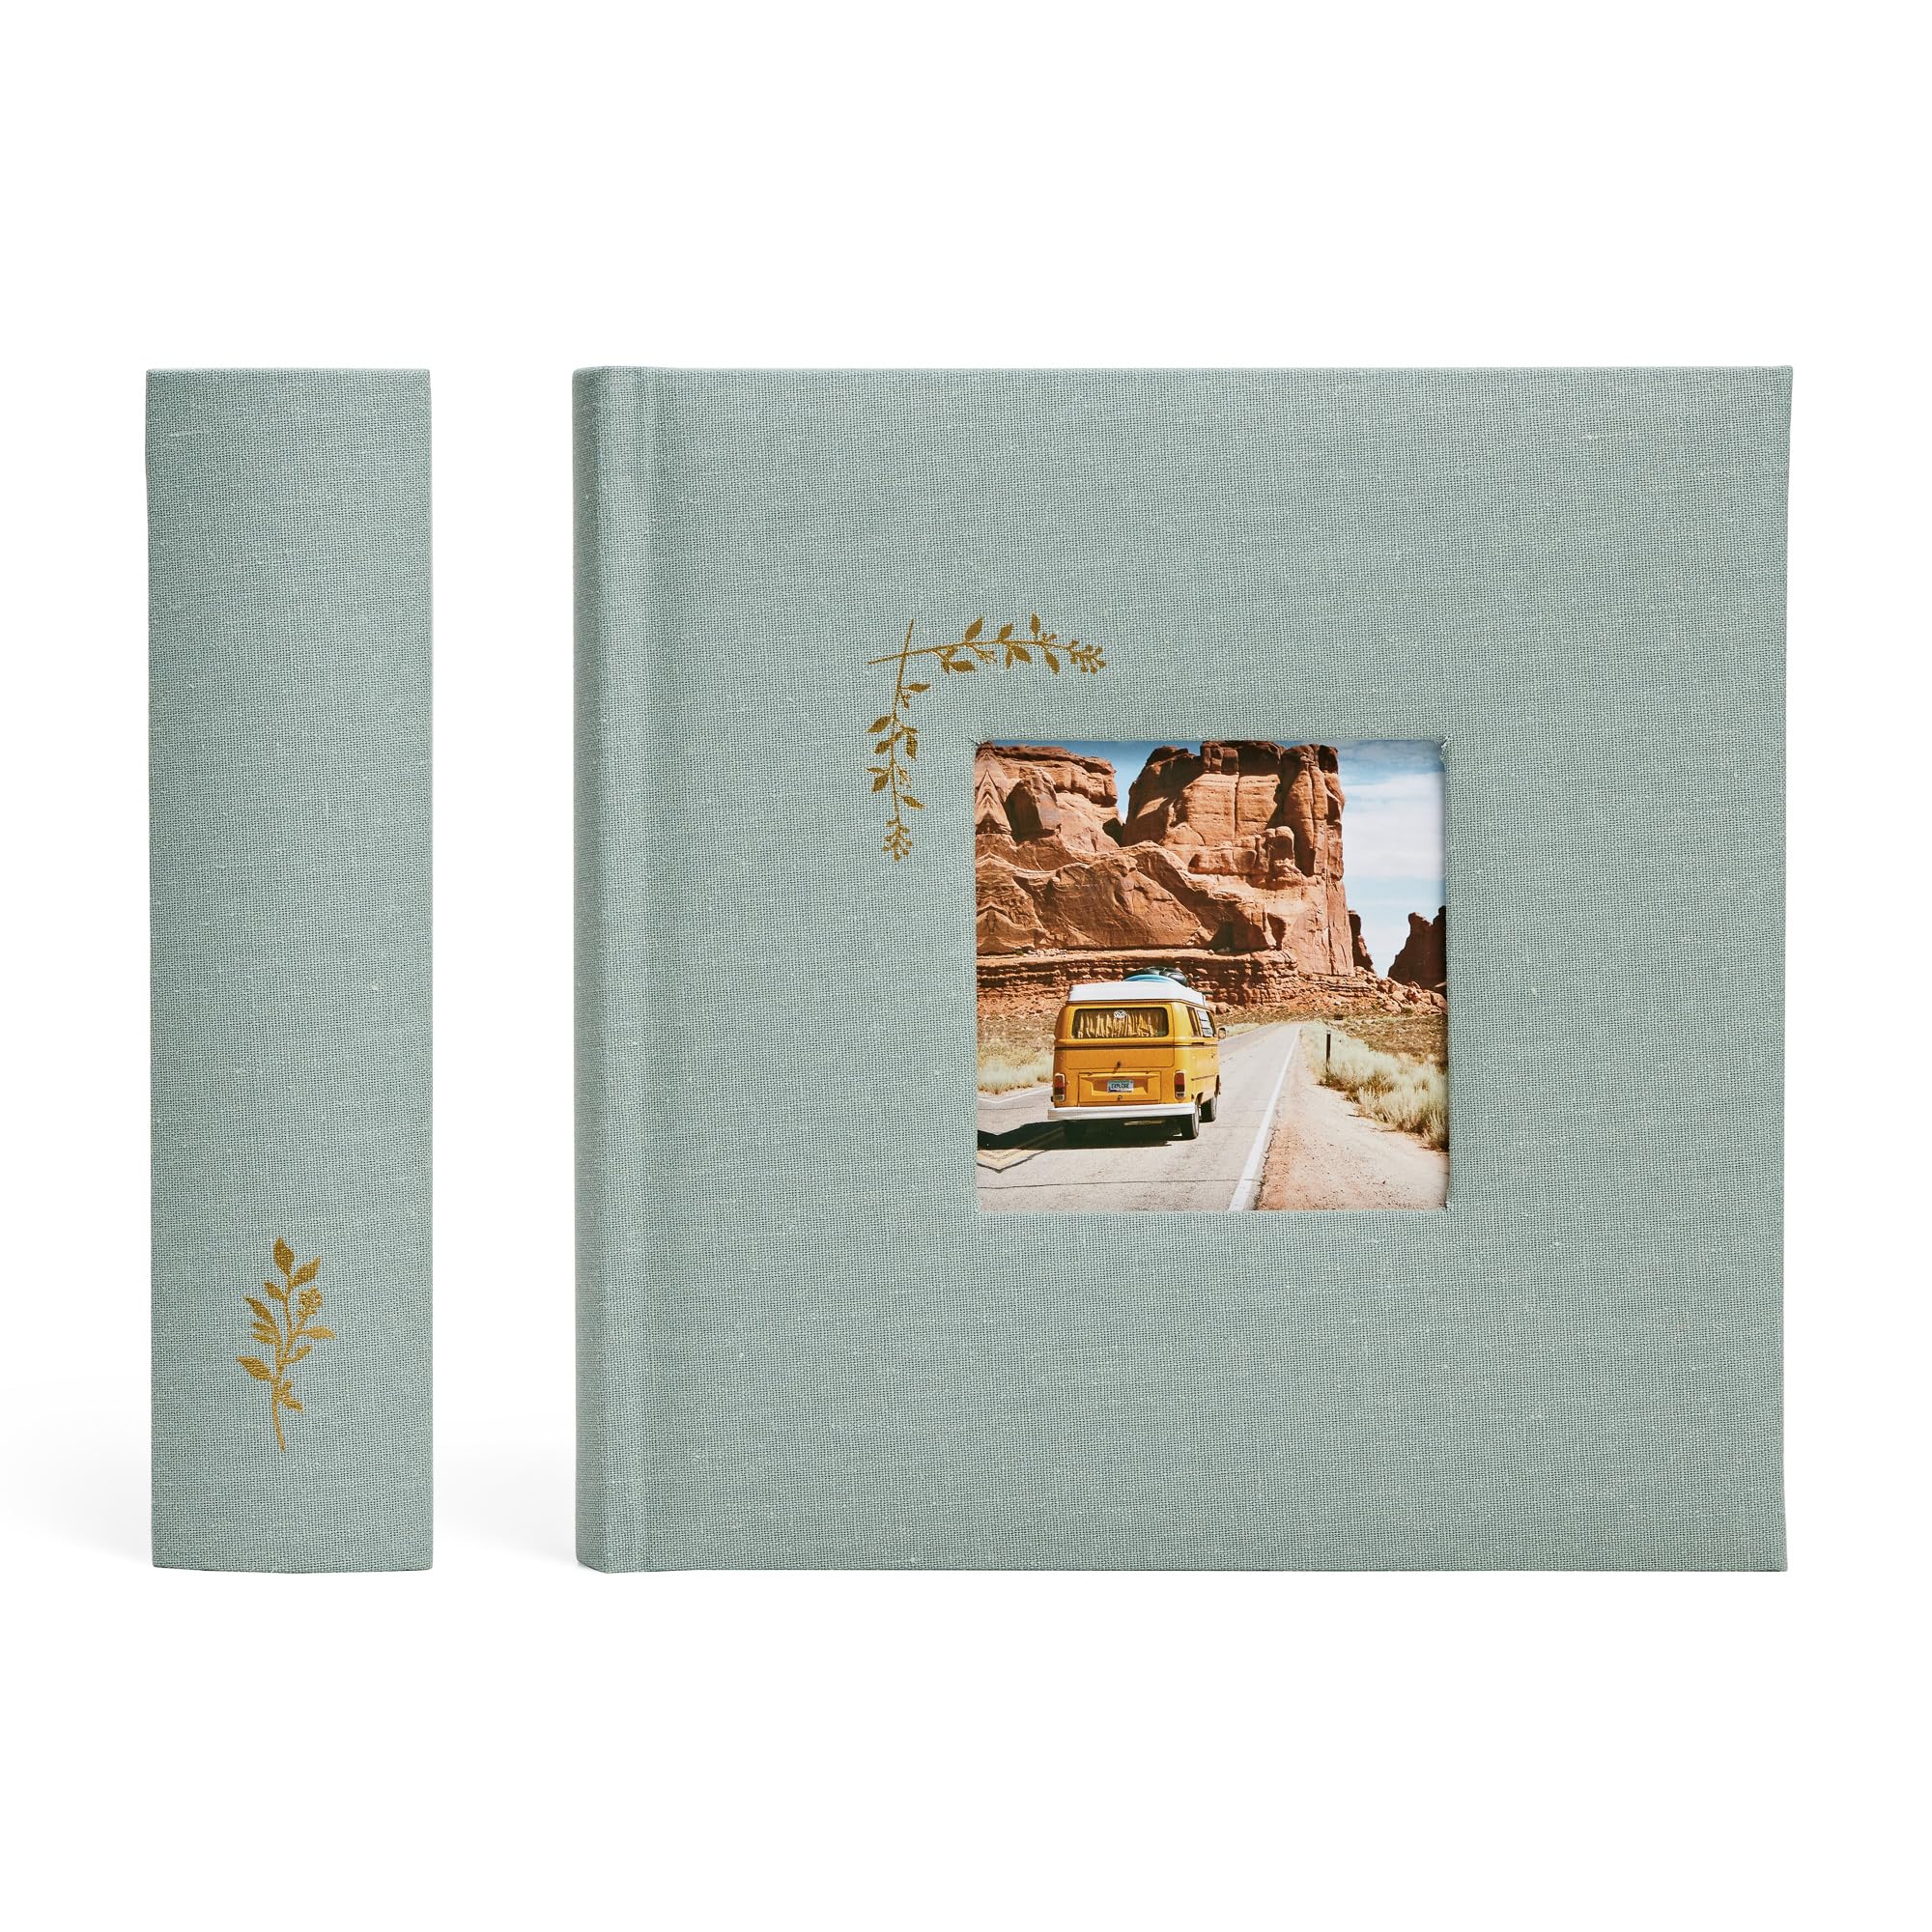 La Lente Luxury Linen Photo Album with Acid Free Pockets, Traditional Book Bound with Hard Cover, 200 Pockets for 4x6 Photos, Photo Book